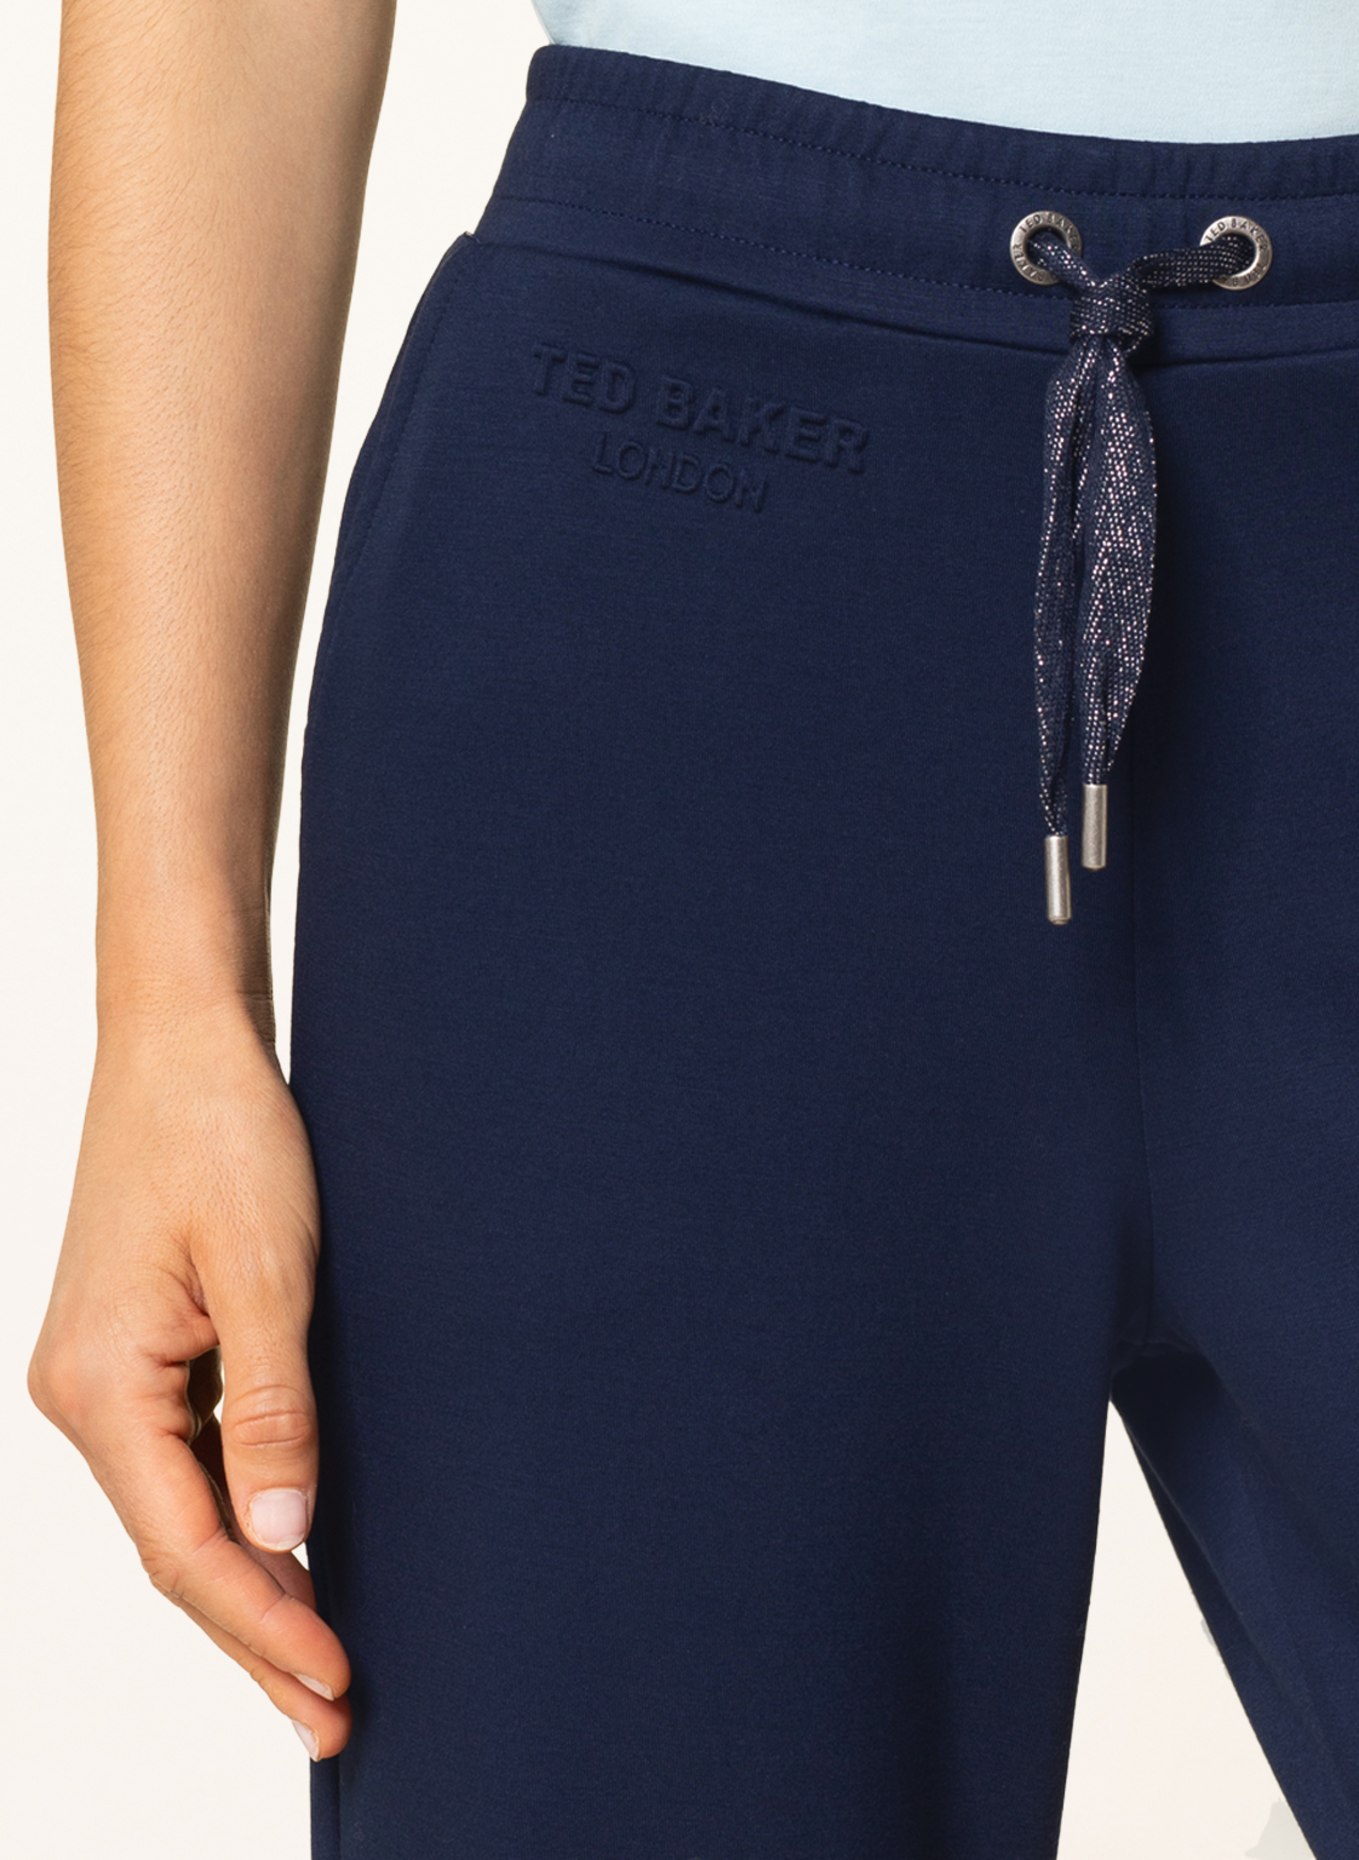 TED BAKER Pants ORTHON in jogger style, Color: DARK BLUE (Image 5)